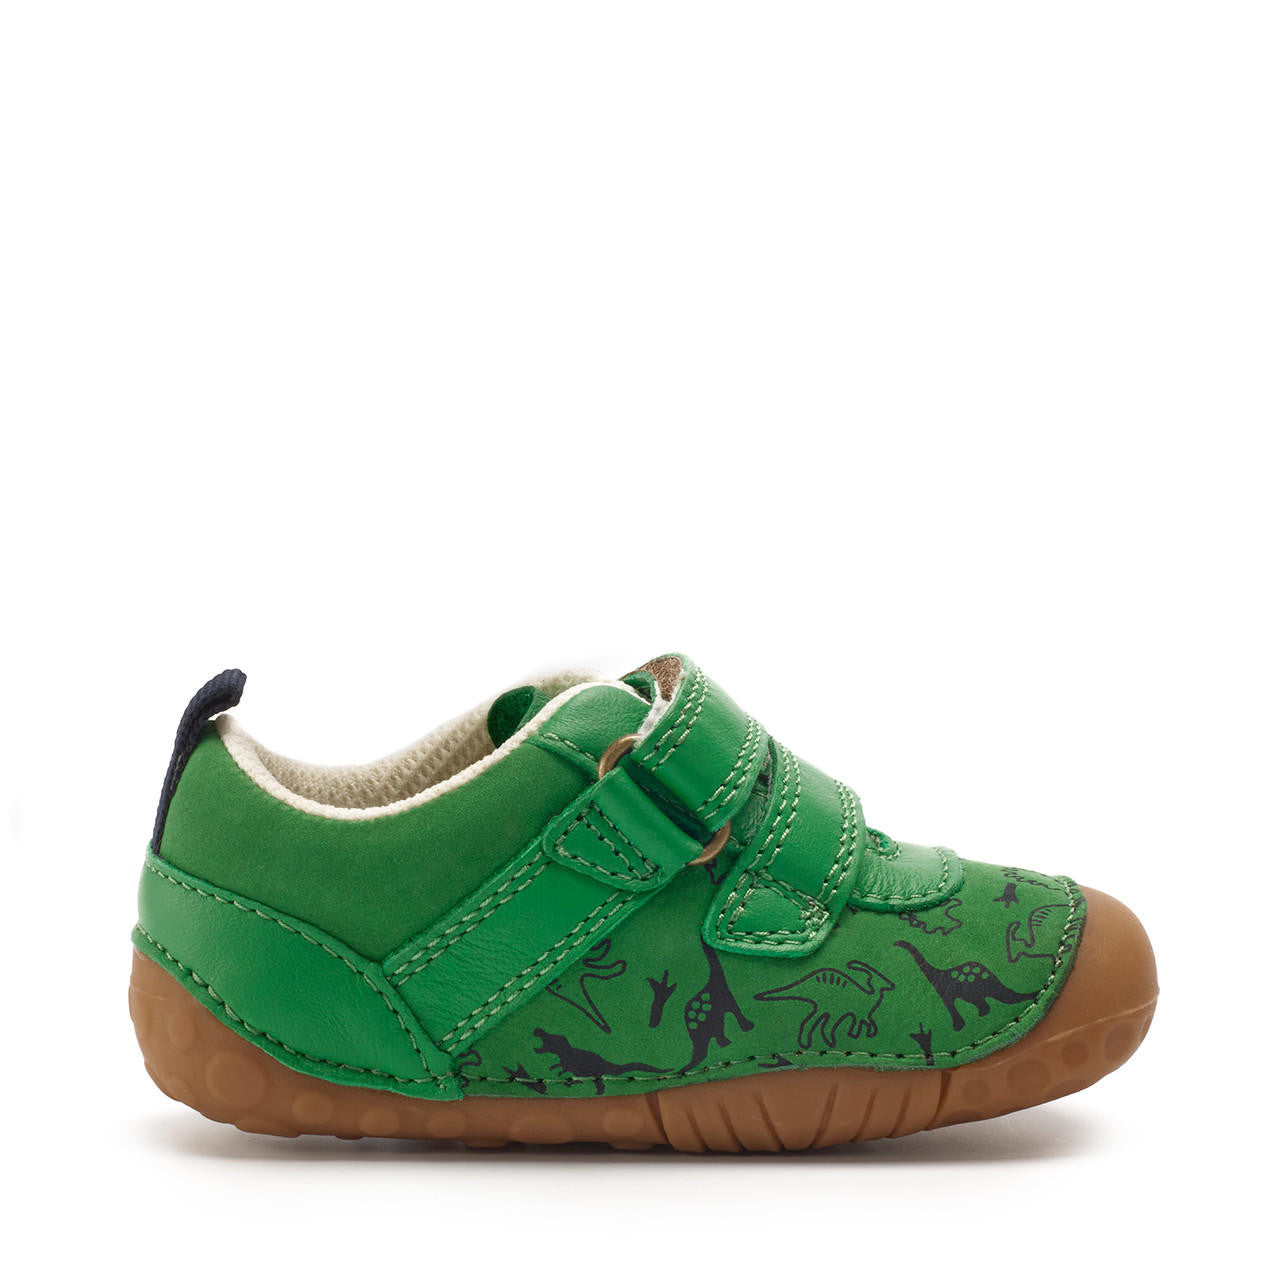 A boys pre walker by Start-Rite, style Roar, in green nubuck with navy dinosaur print and velcro fastening. Left side view.